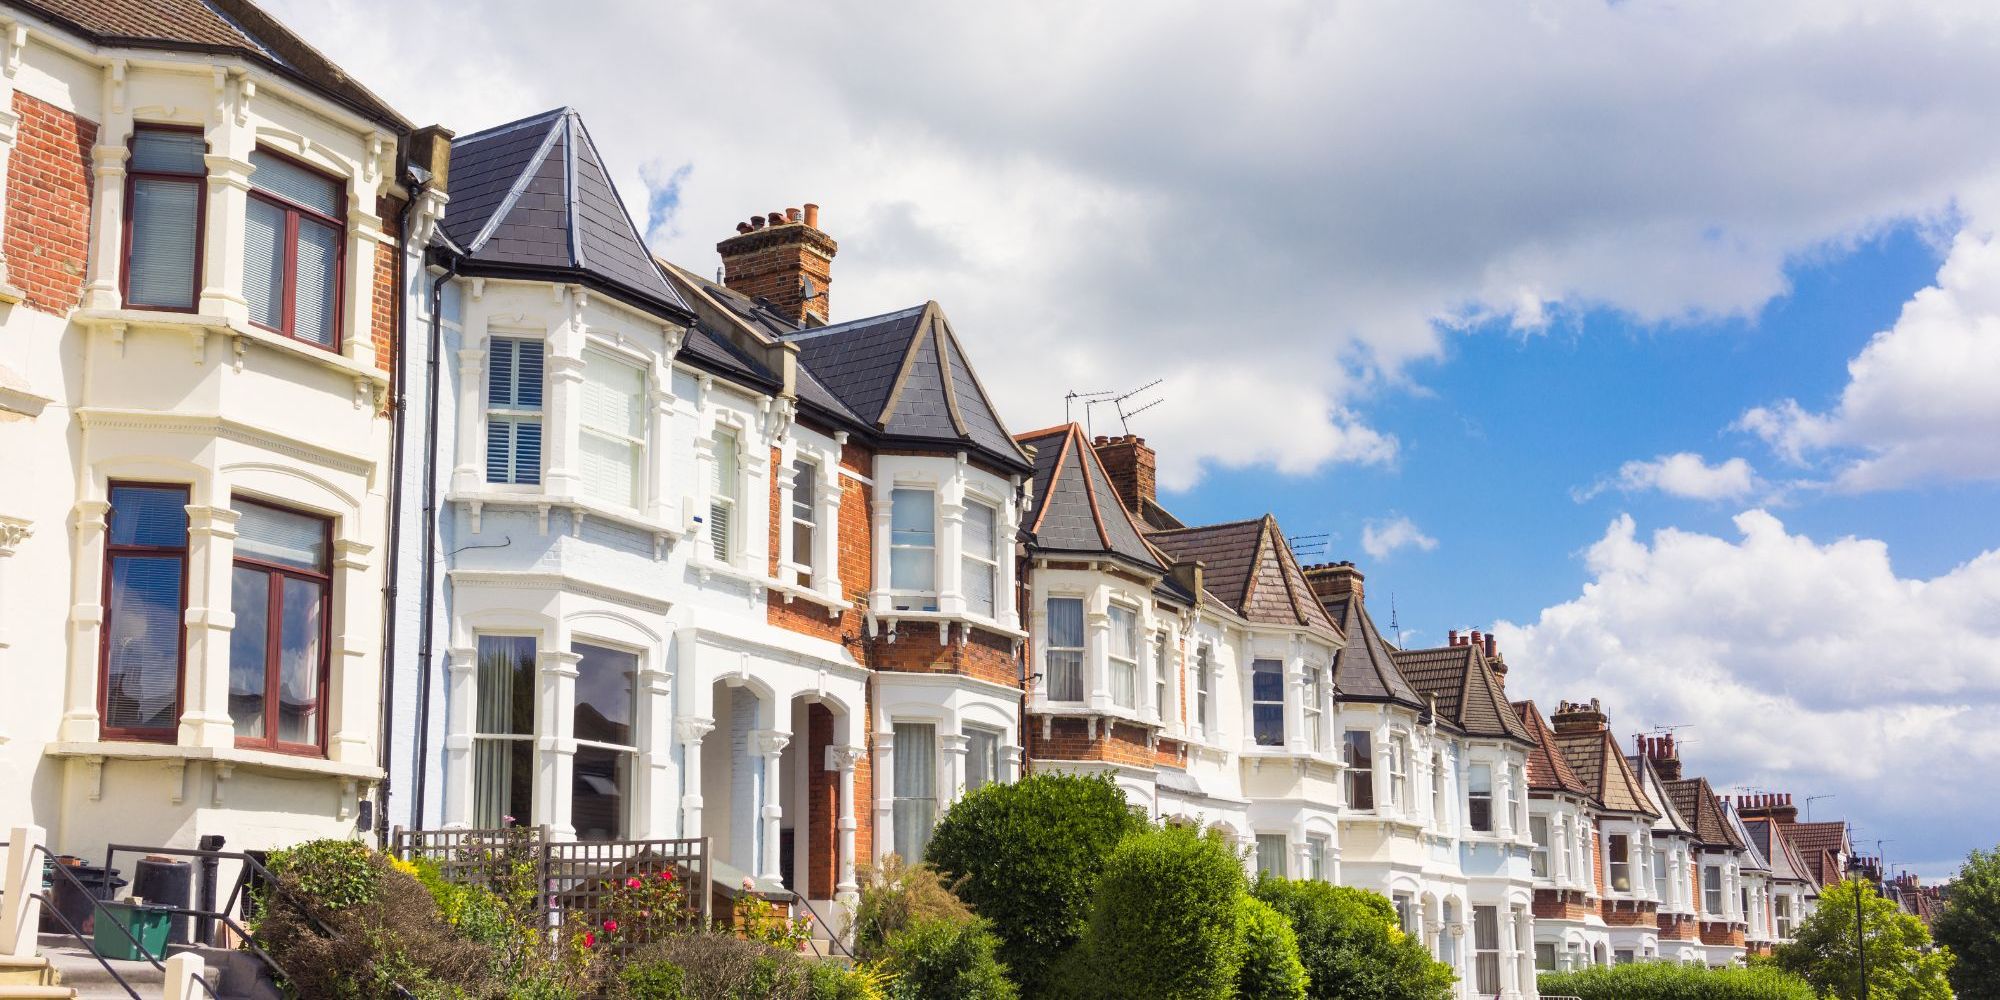 The role of a conveyancer.